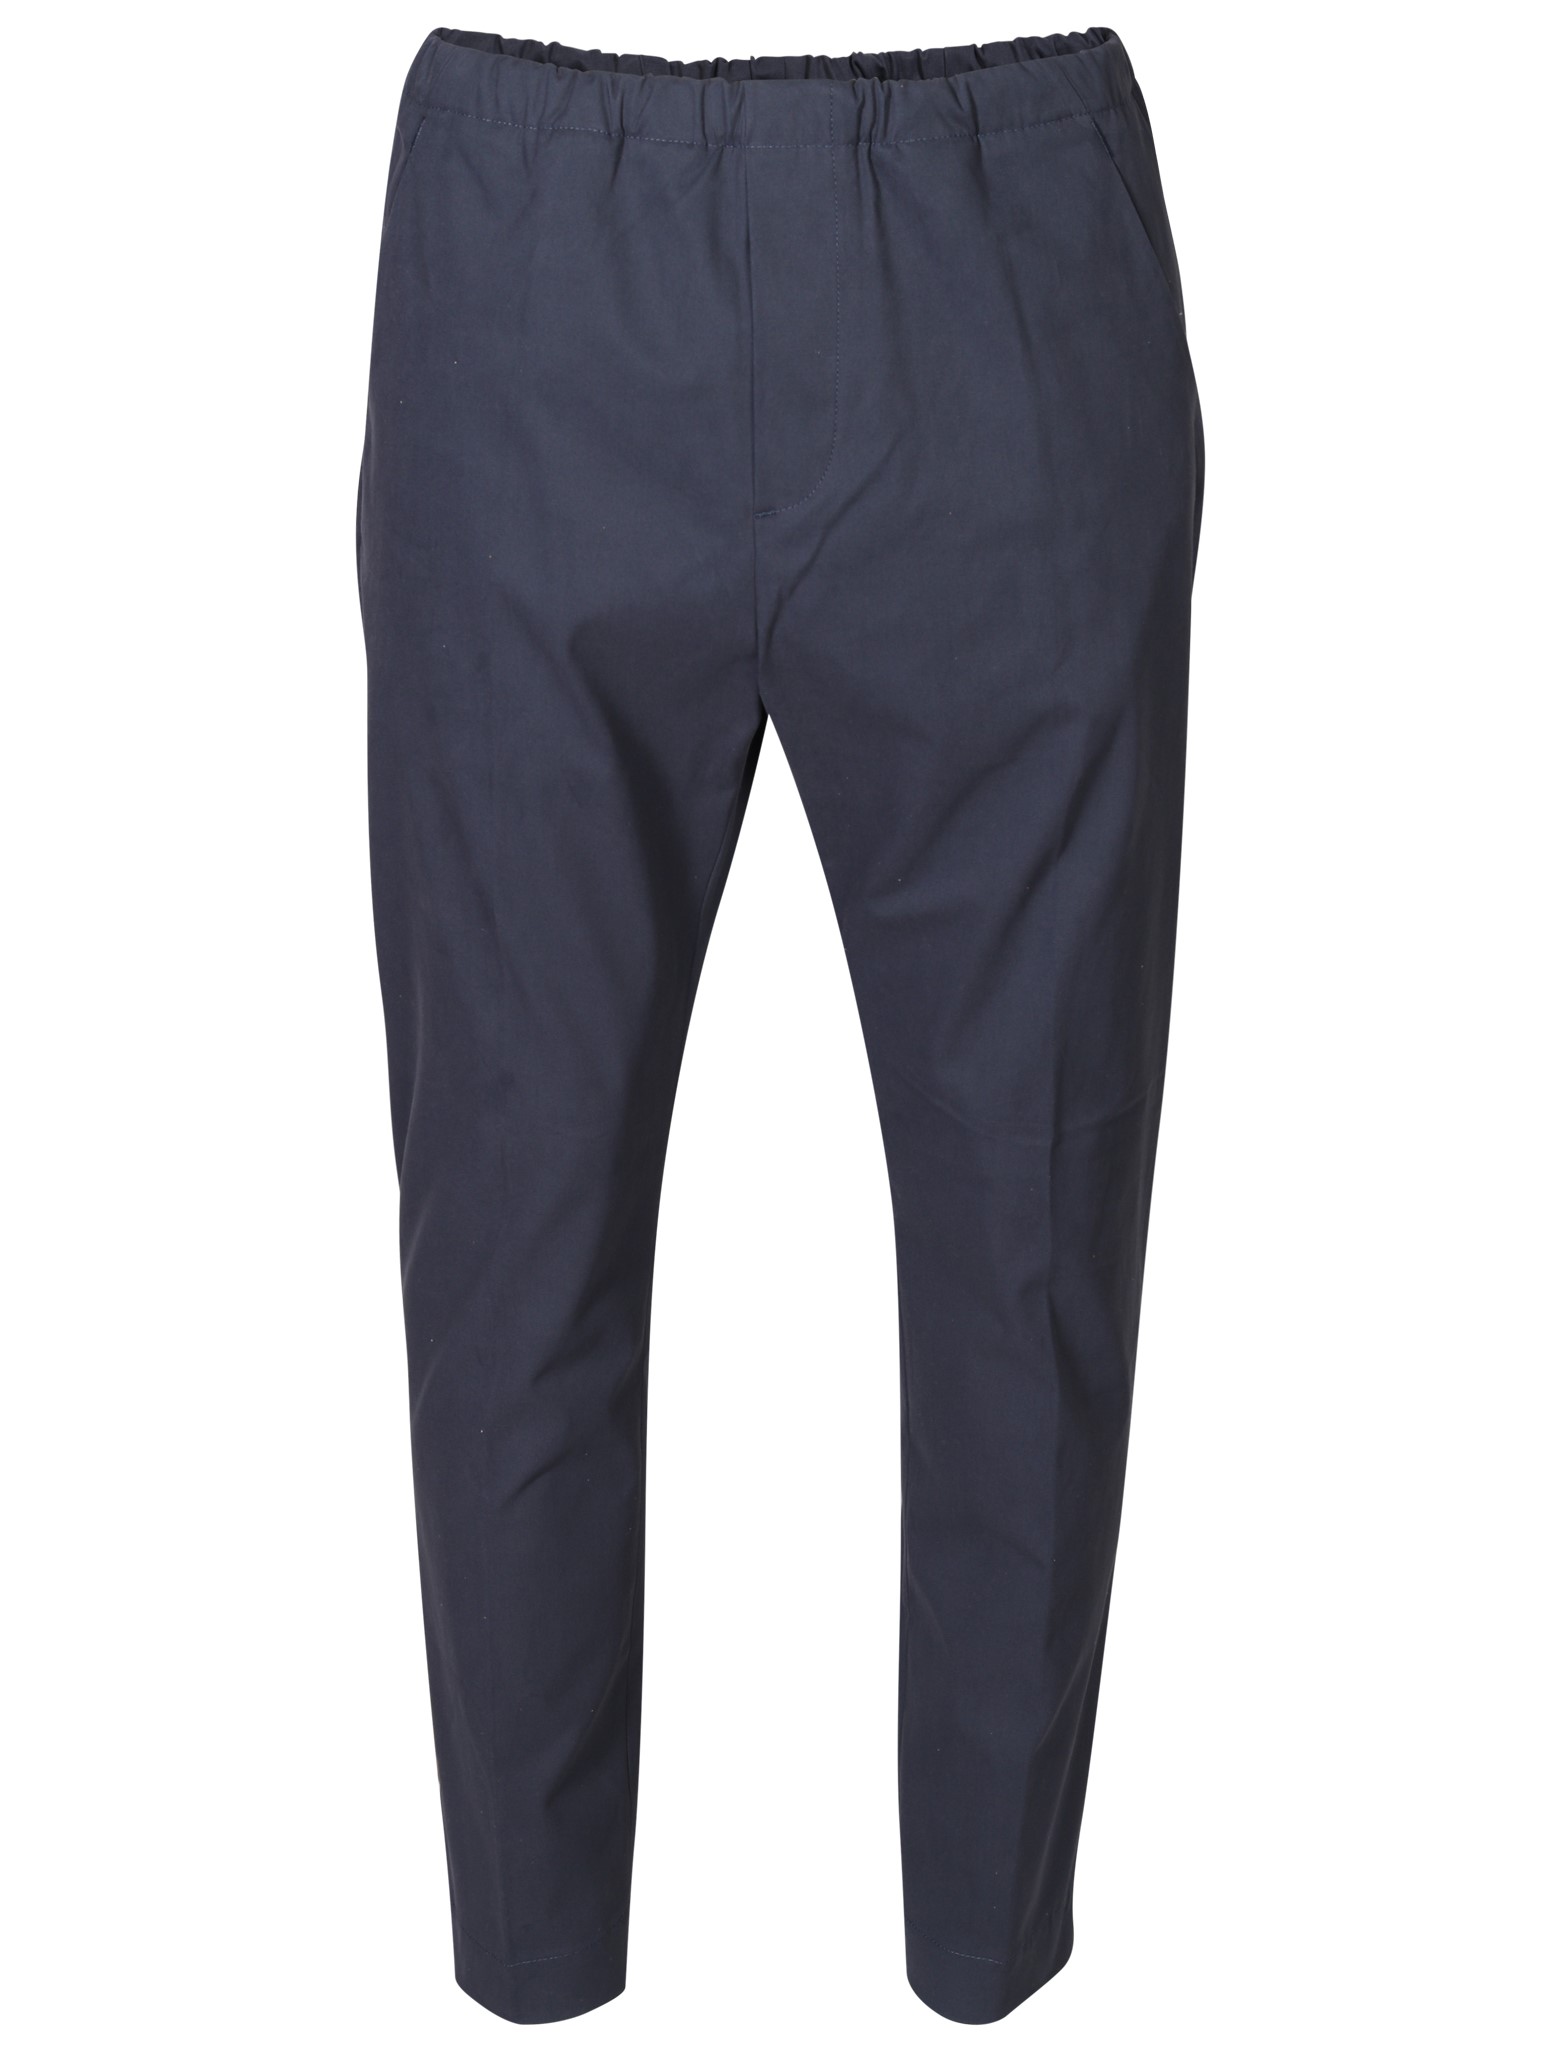 NINE:INTHE:MORNING Mirco Carrot Cotton Stretch Pant in Blue Navy 46